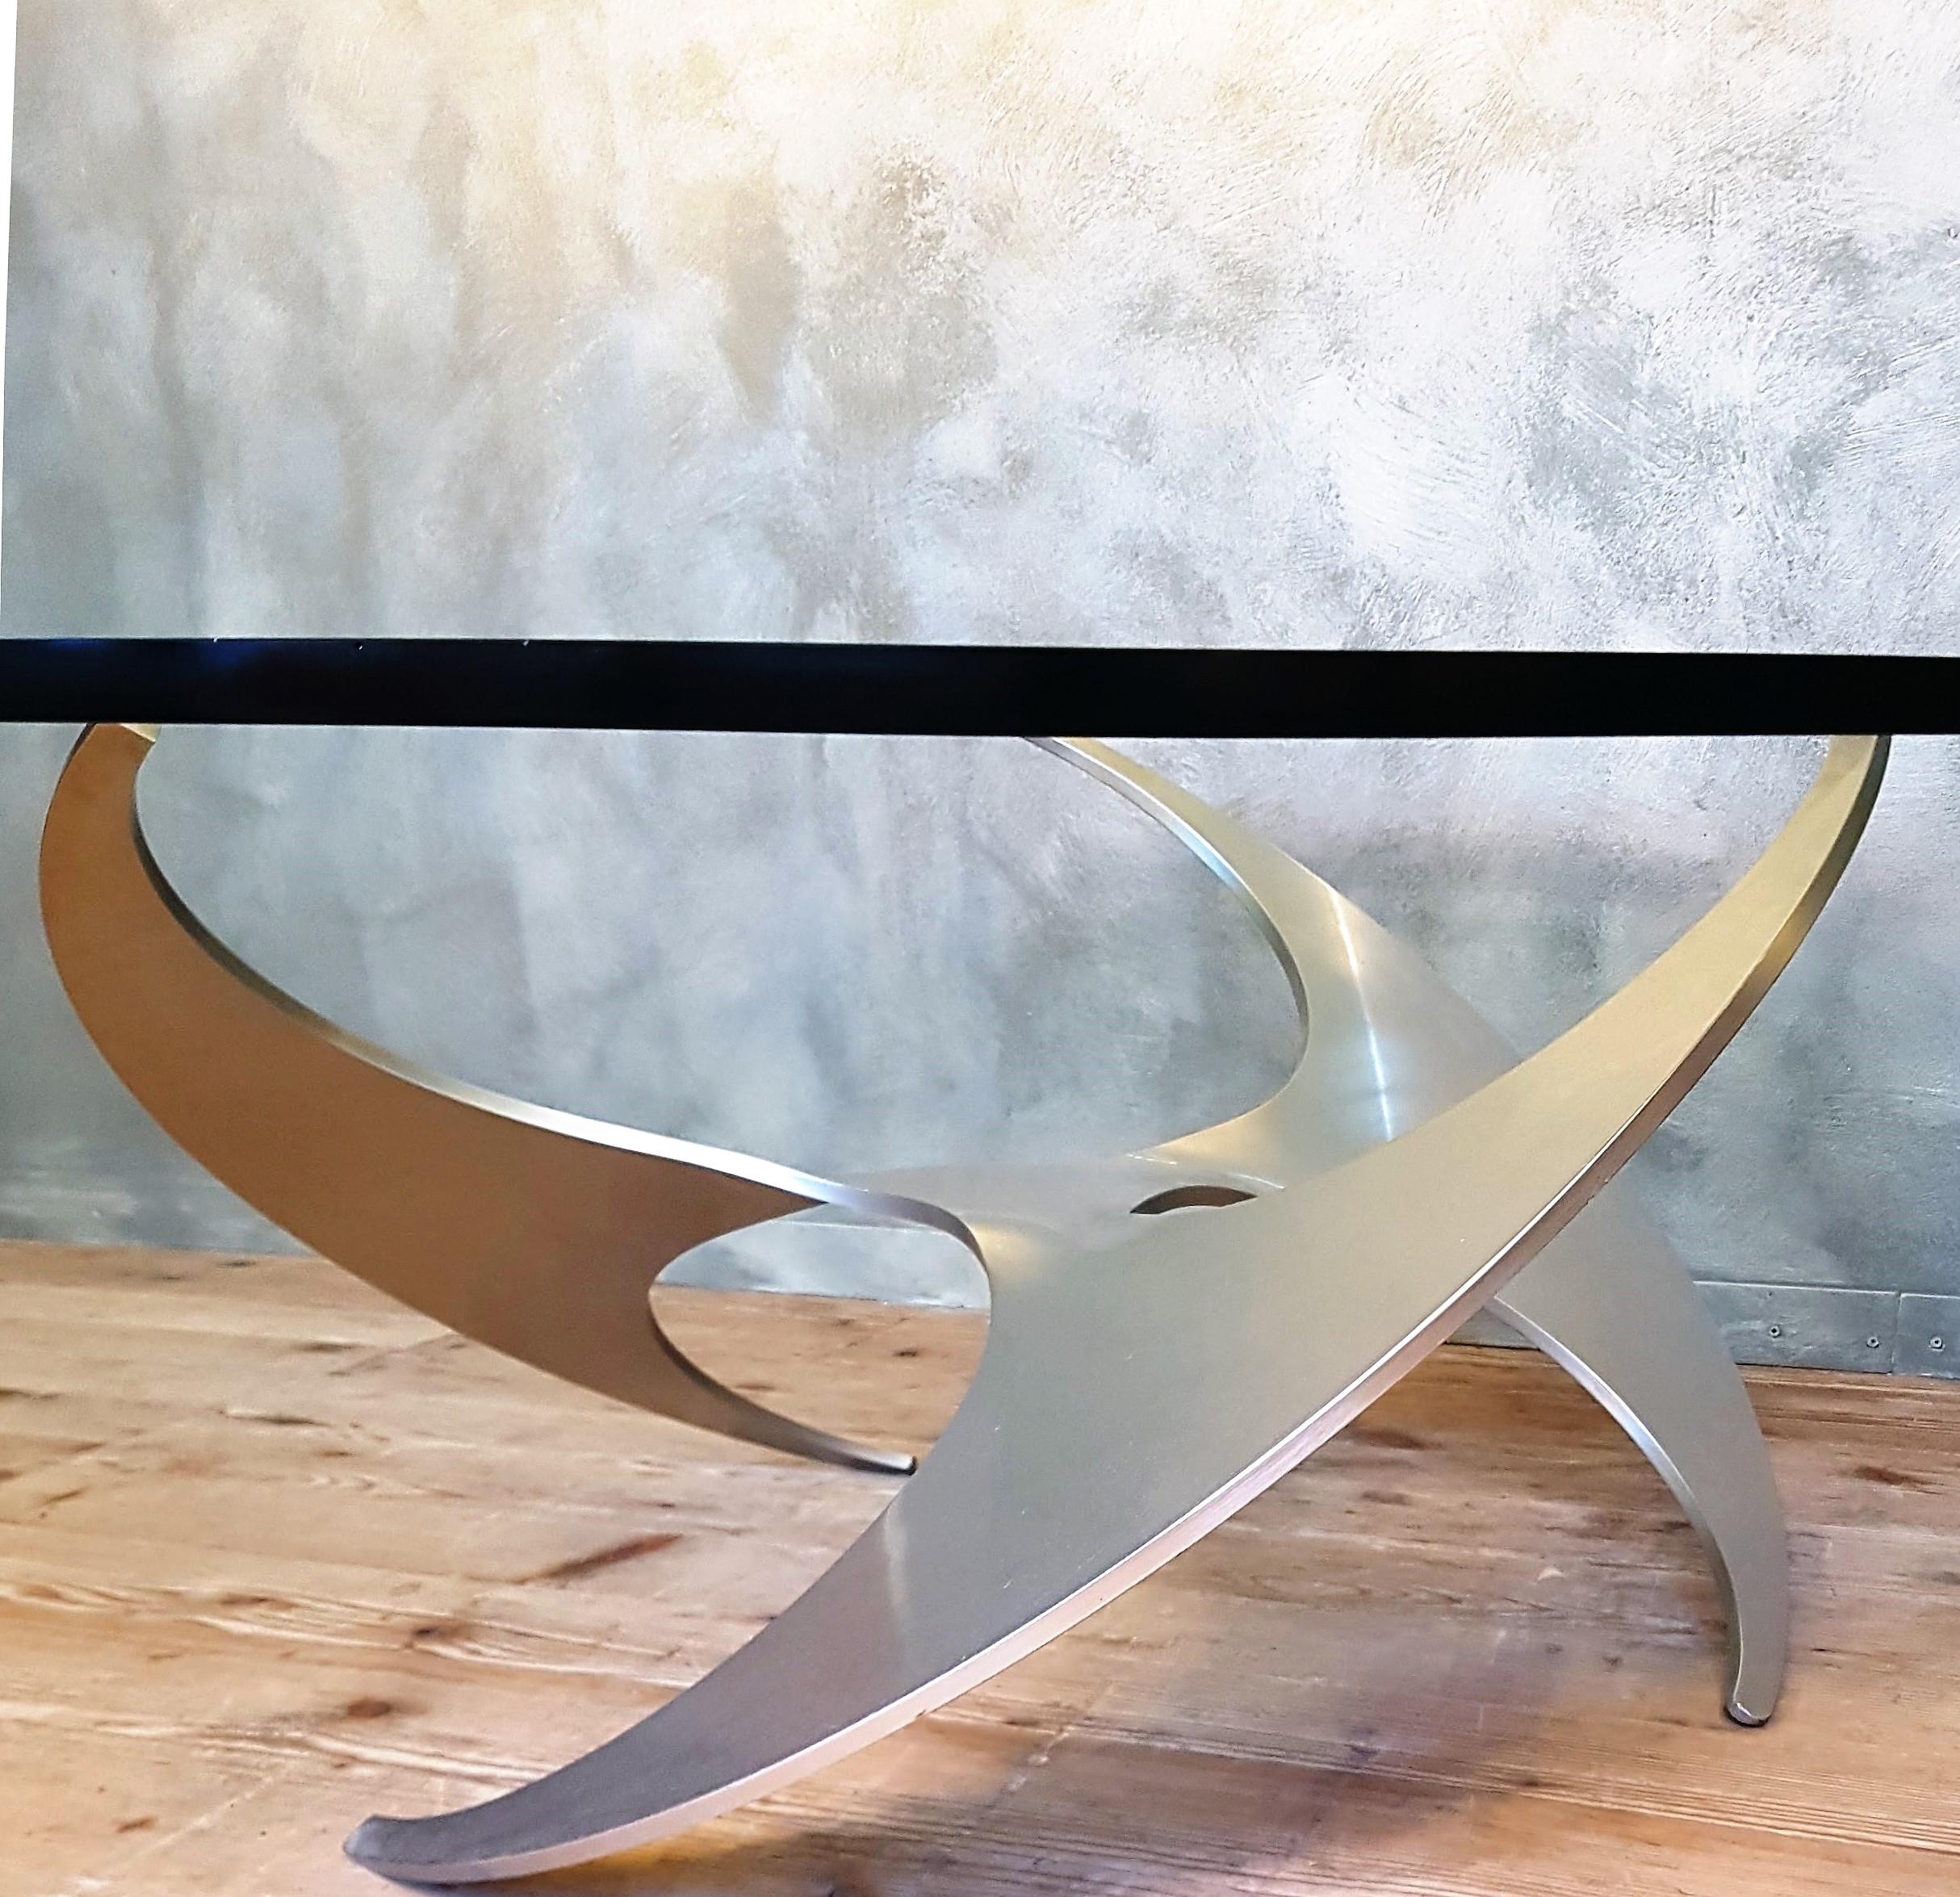 The sculptural foot is made of three rings of brushed aluminum. The 19mm thick glass top rests on glass protectors on this frame.